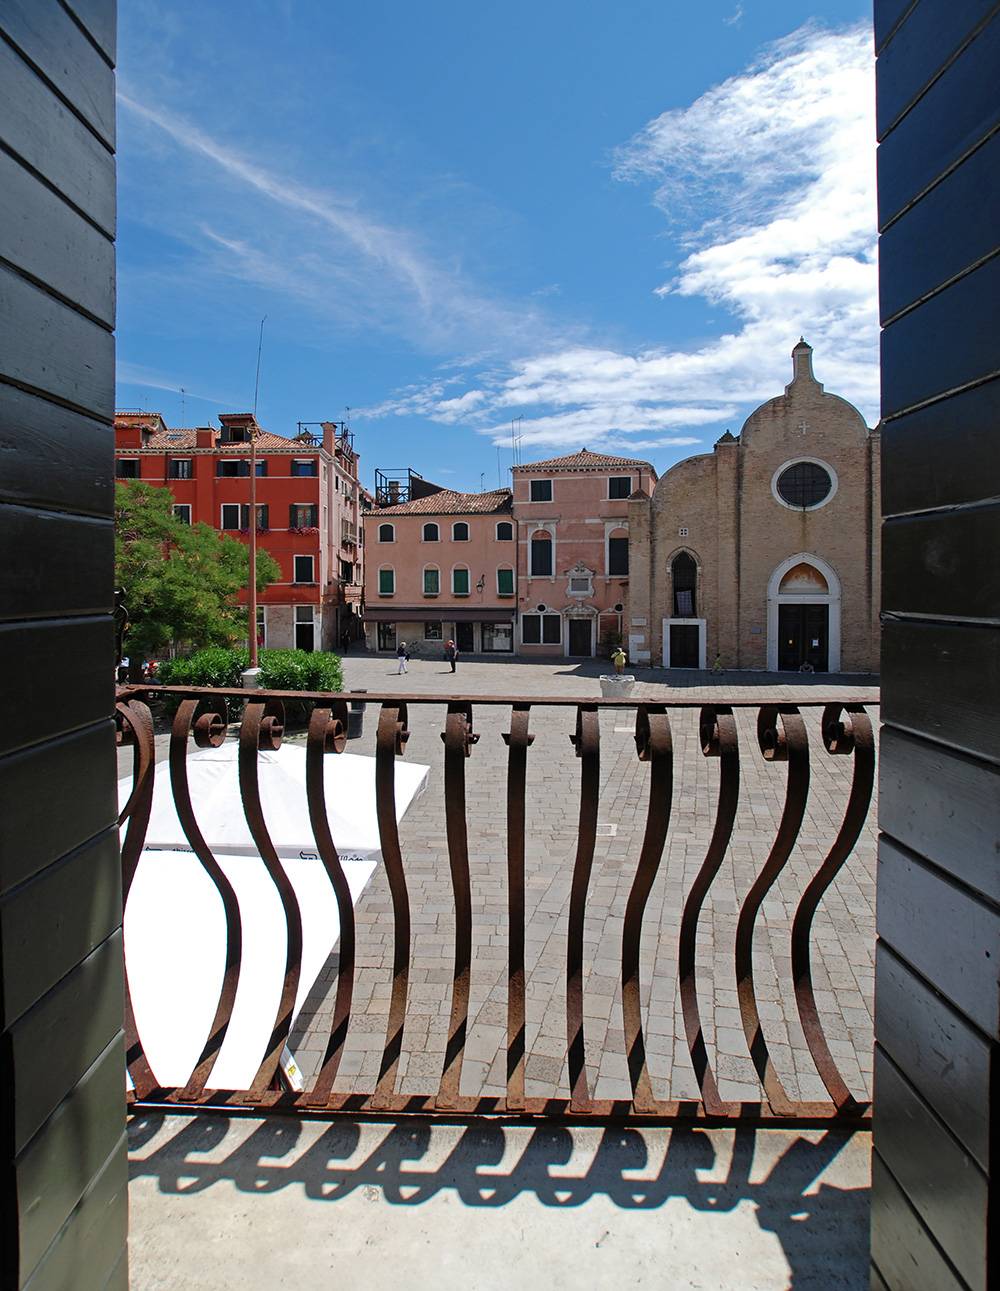 the view is incredibly charming, 100% Venetian